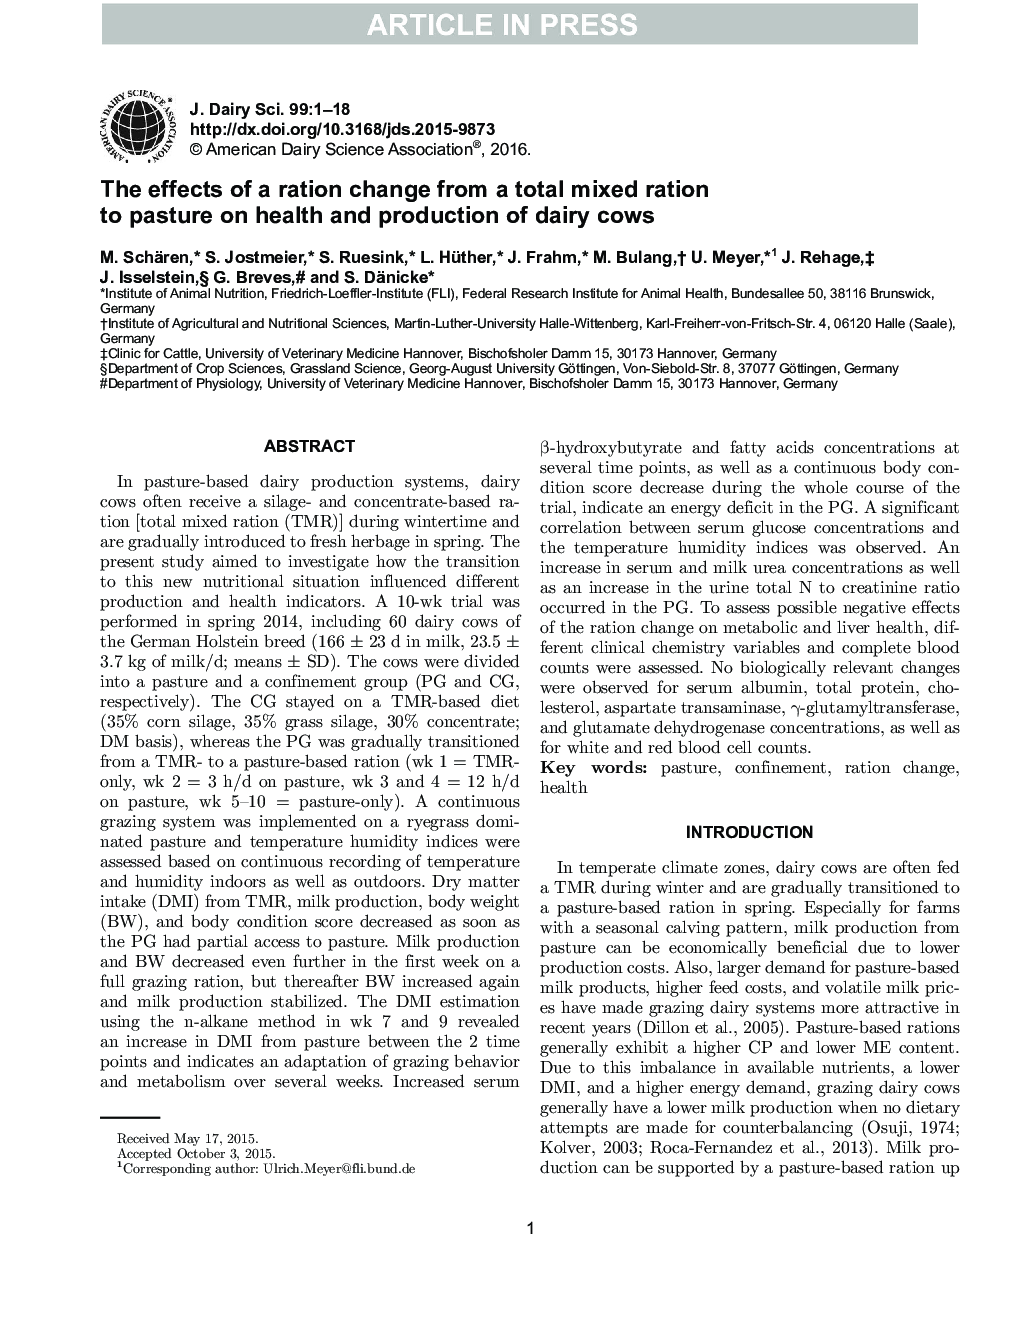 The effects of a ration change from a total mixed ration to pasture on health and production of dairy cows